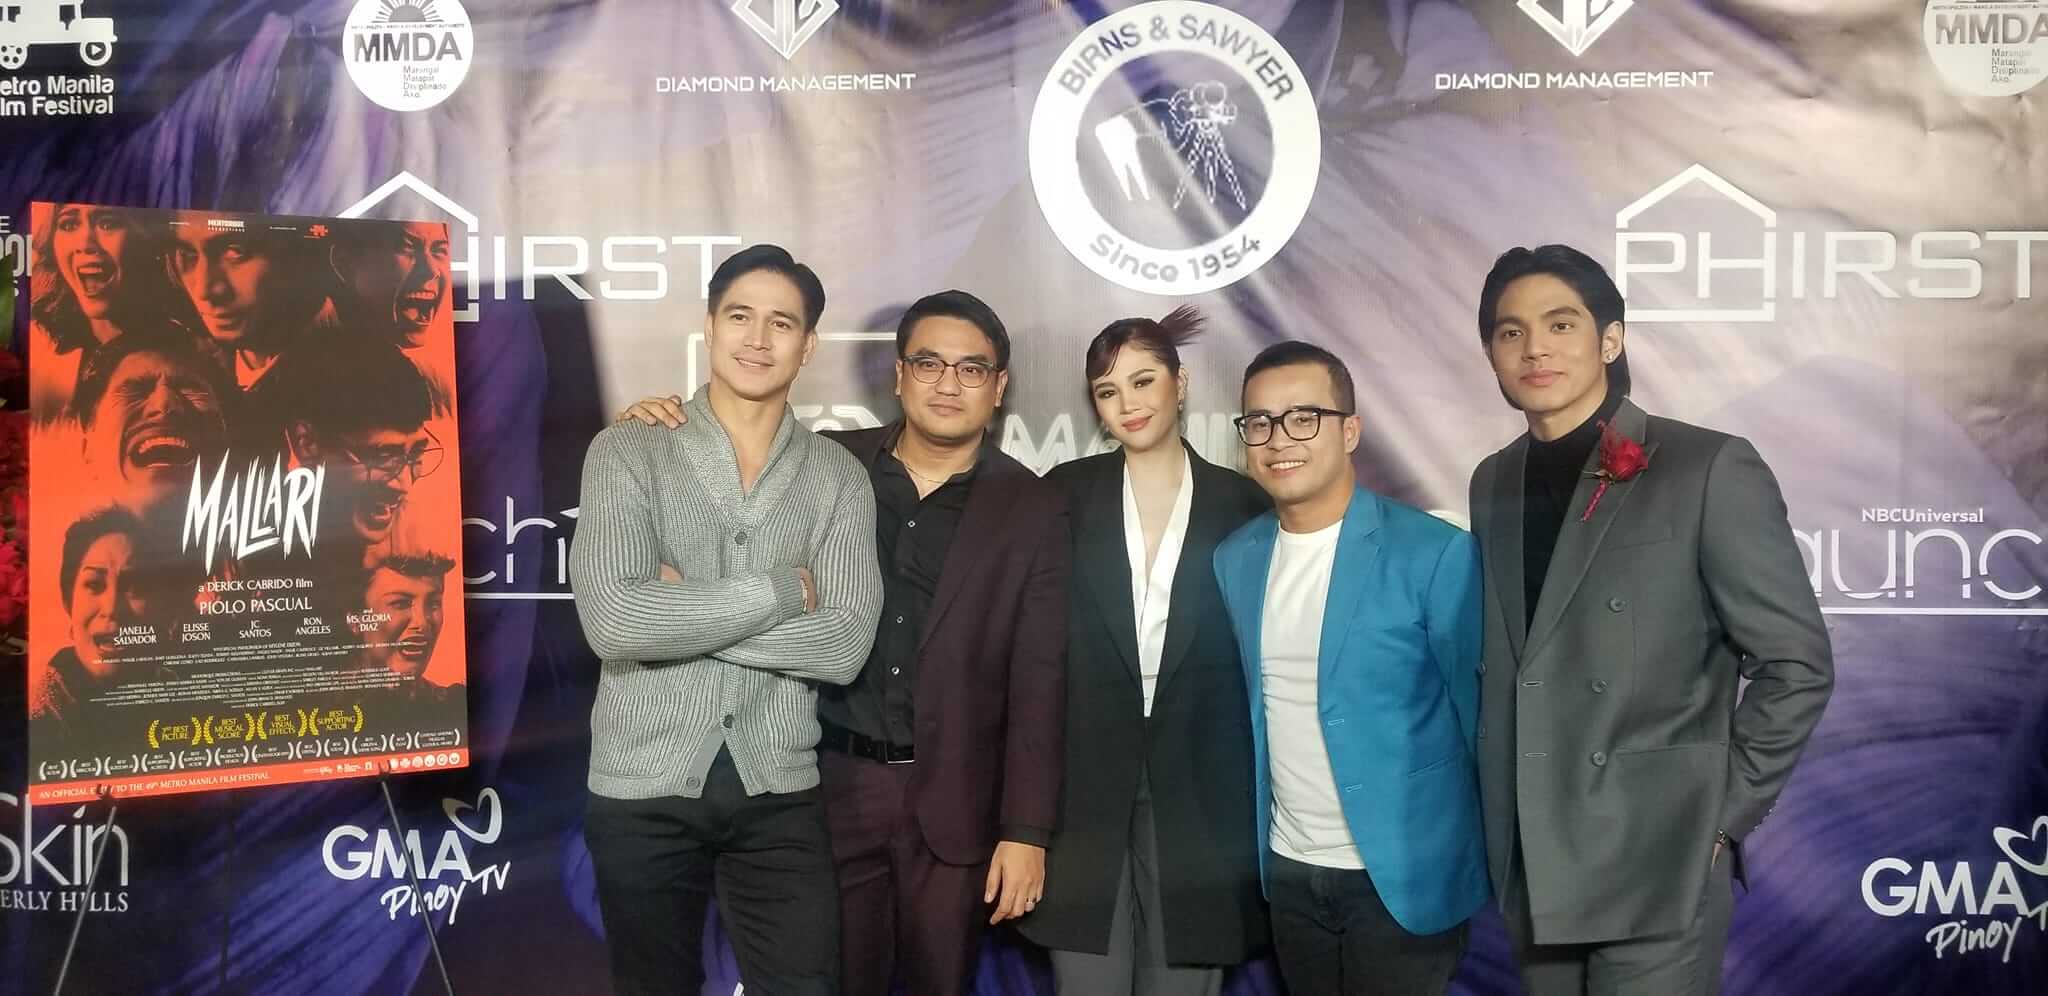 Read more about the article Manila International Film Festival (MIFF) kicked-off with a presscon attended by stars, filmmakers, producers from the ten films participating and Metro Manila Film Festival (MMFF) Executives; LIZA SOBERANO attends MALLARI screening 